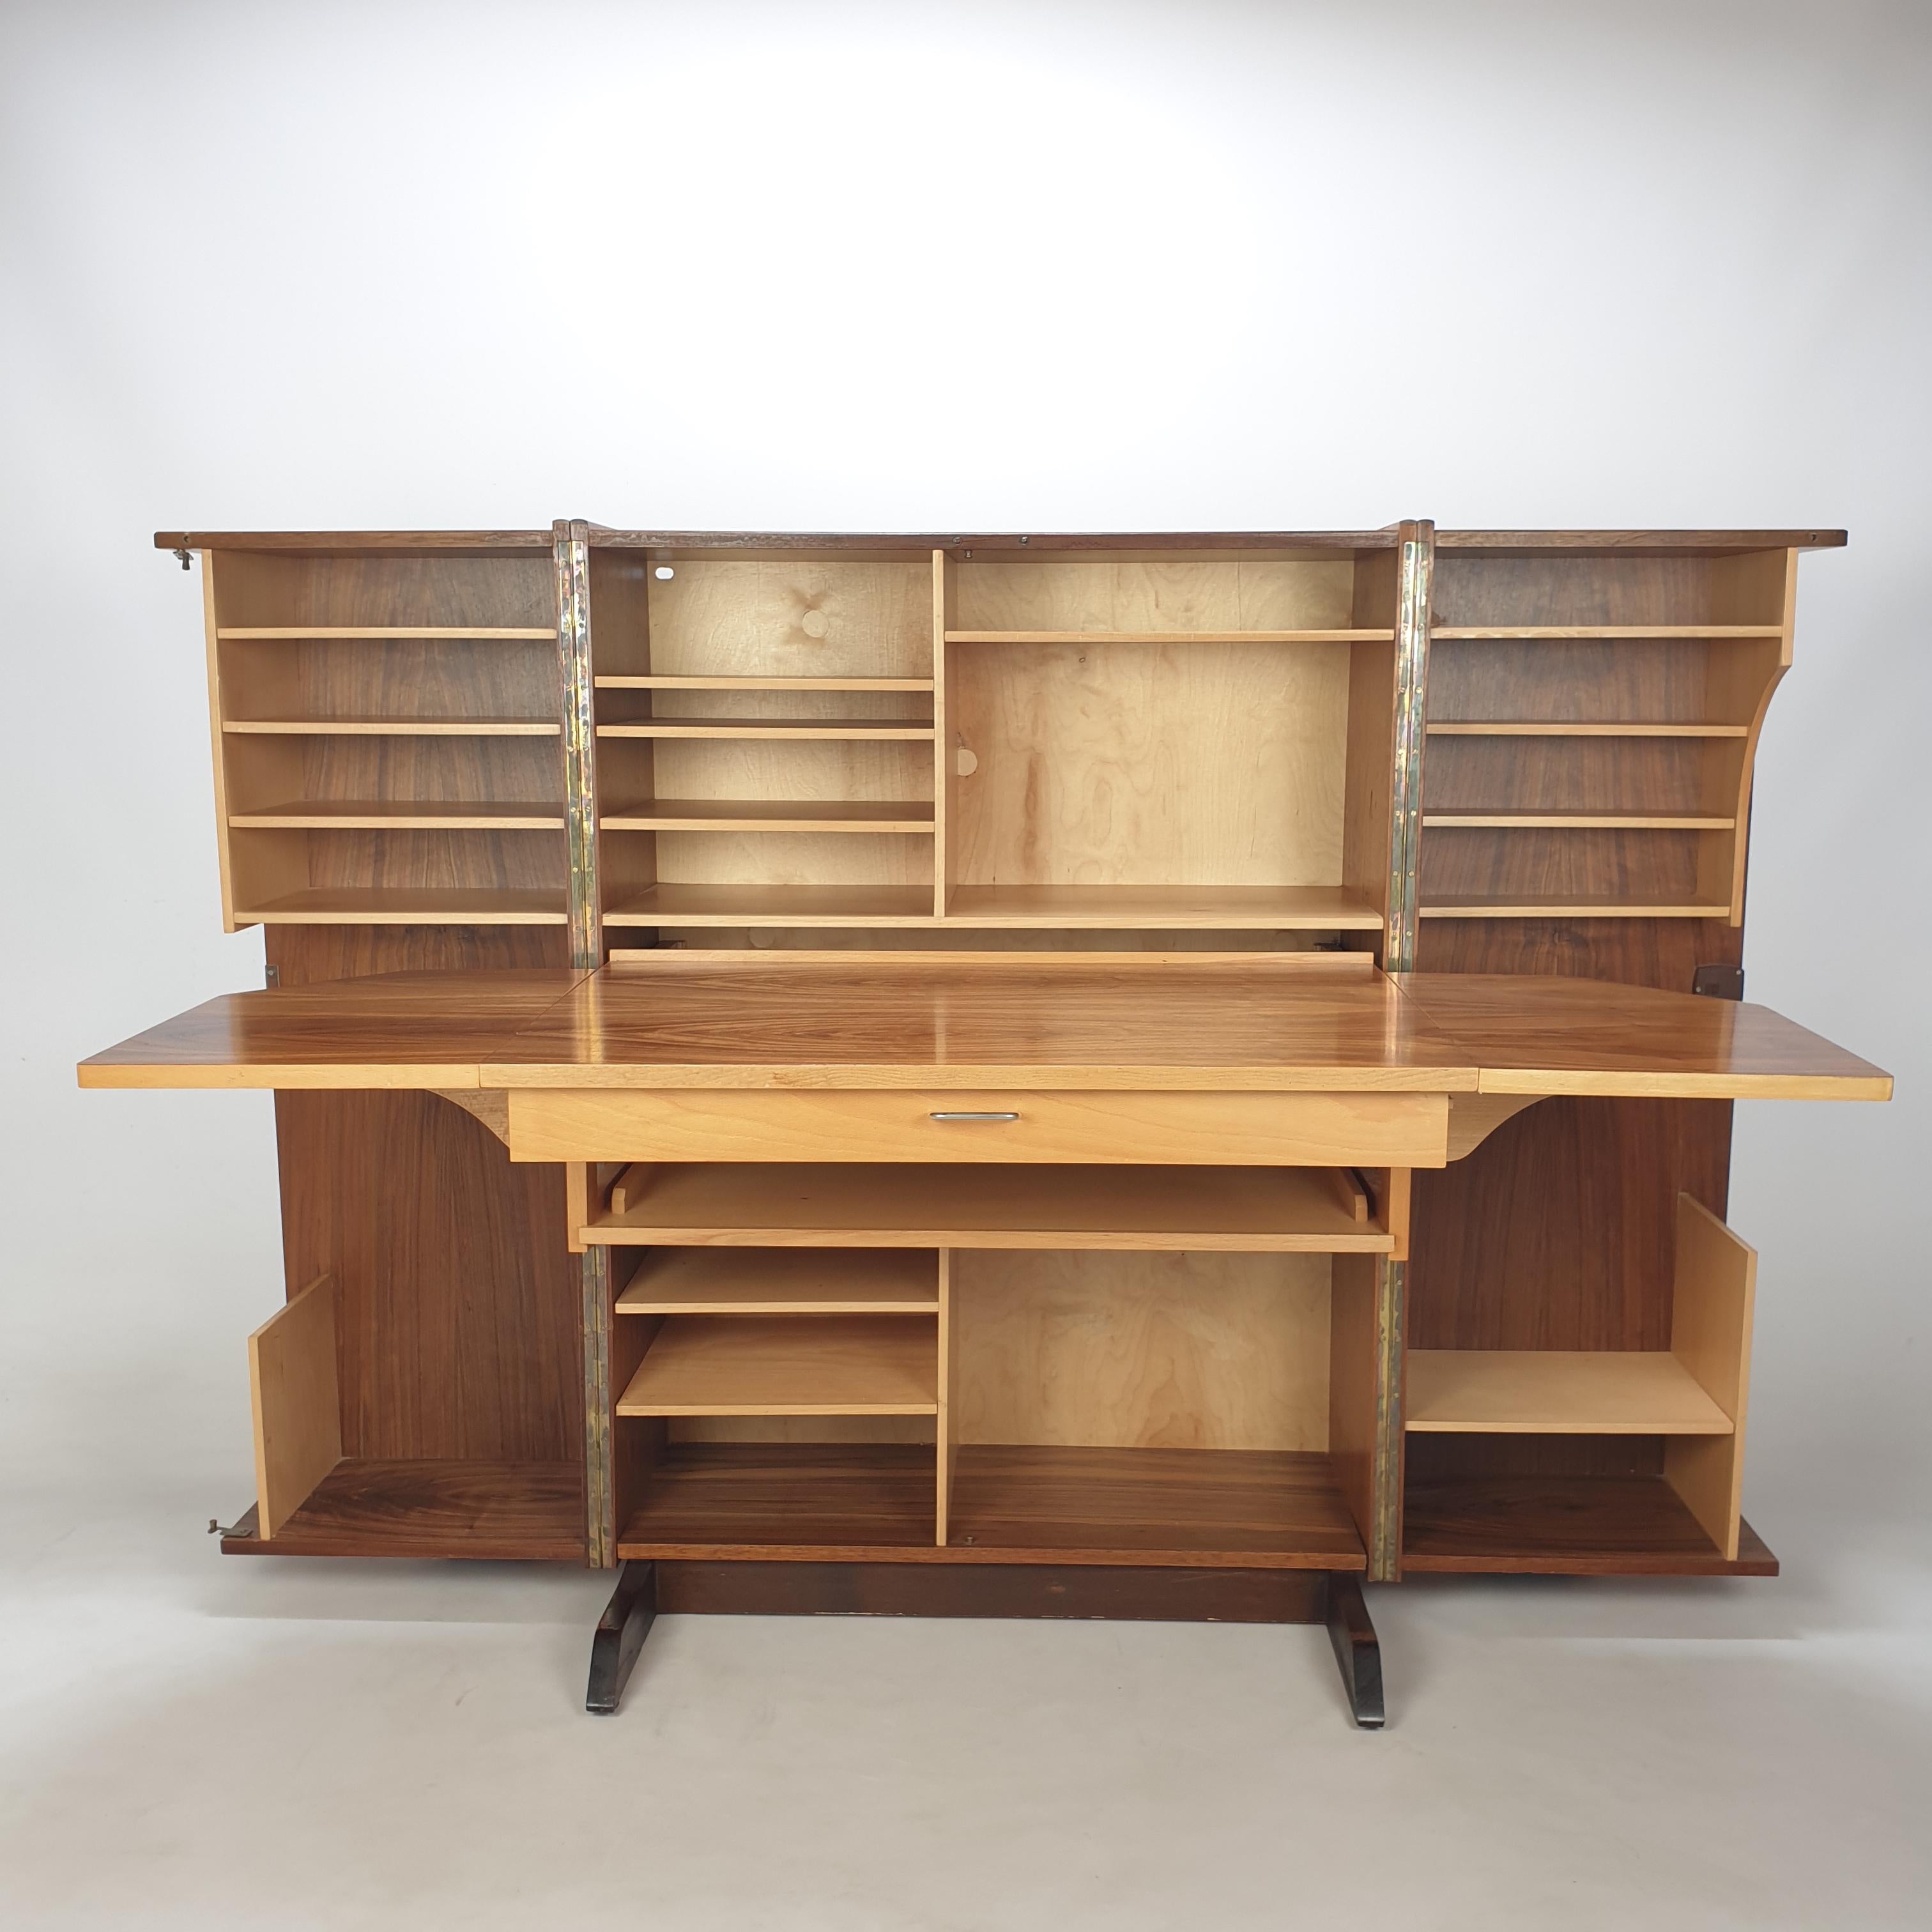 This absolute phenomenal writing desk, was designed by Mummenthaler and Meier (Switzerland) in the 60's. 
It is a foldable and closable writing desk or secretary desk called the 